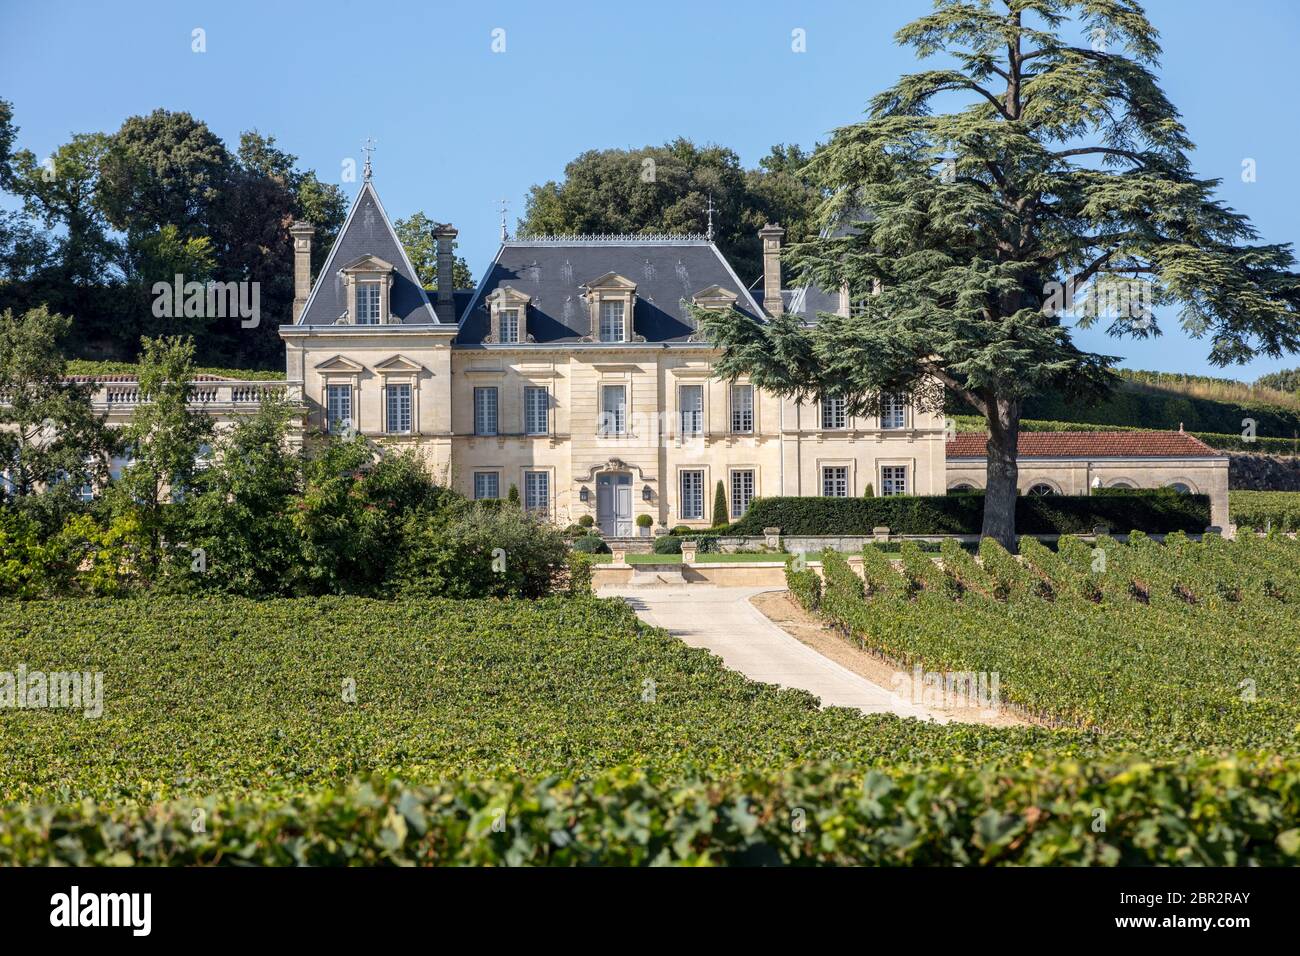 Saint Emilion, France - September 11, 2018: Vineyard of Chateau Fonplegade - name (literally fountain of plenty) was derived from the historic 13th ce Stock Photo